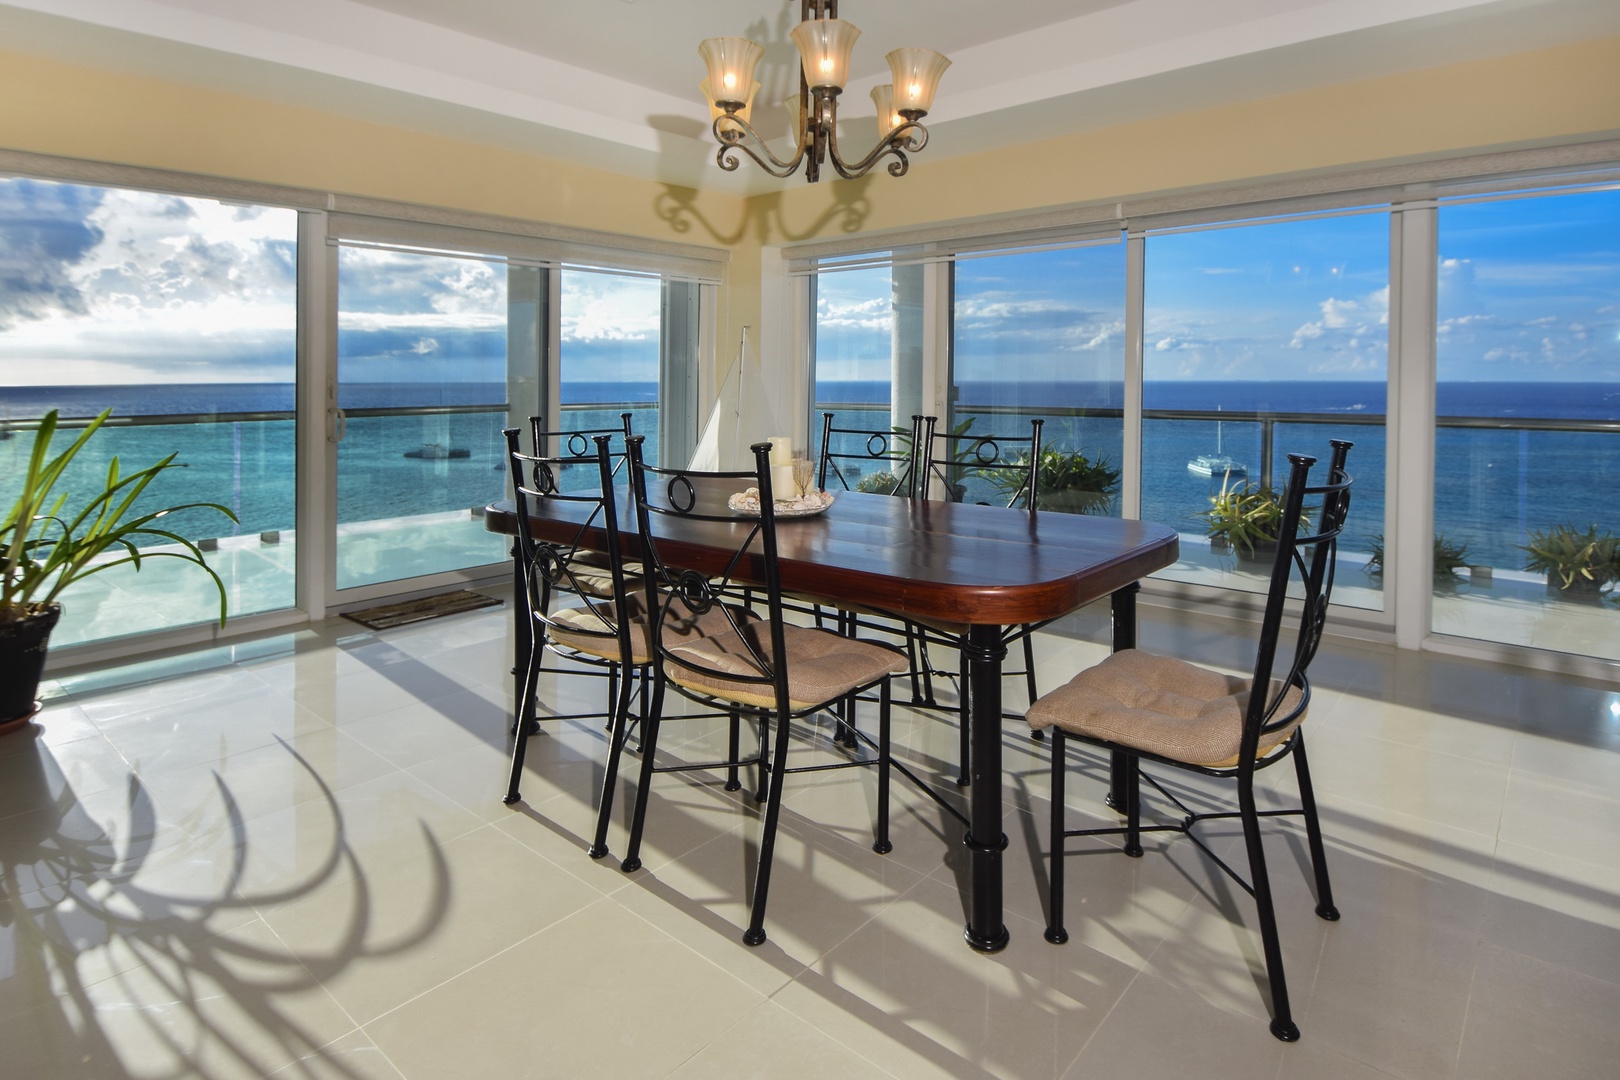 Luxurious Penthouse Condo in Cozumel